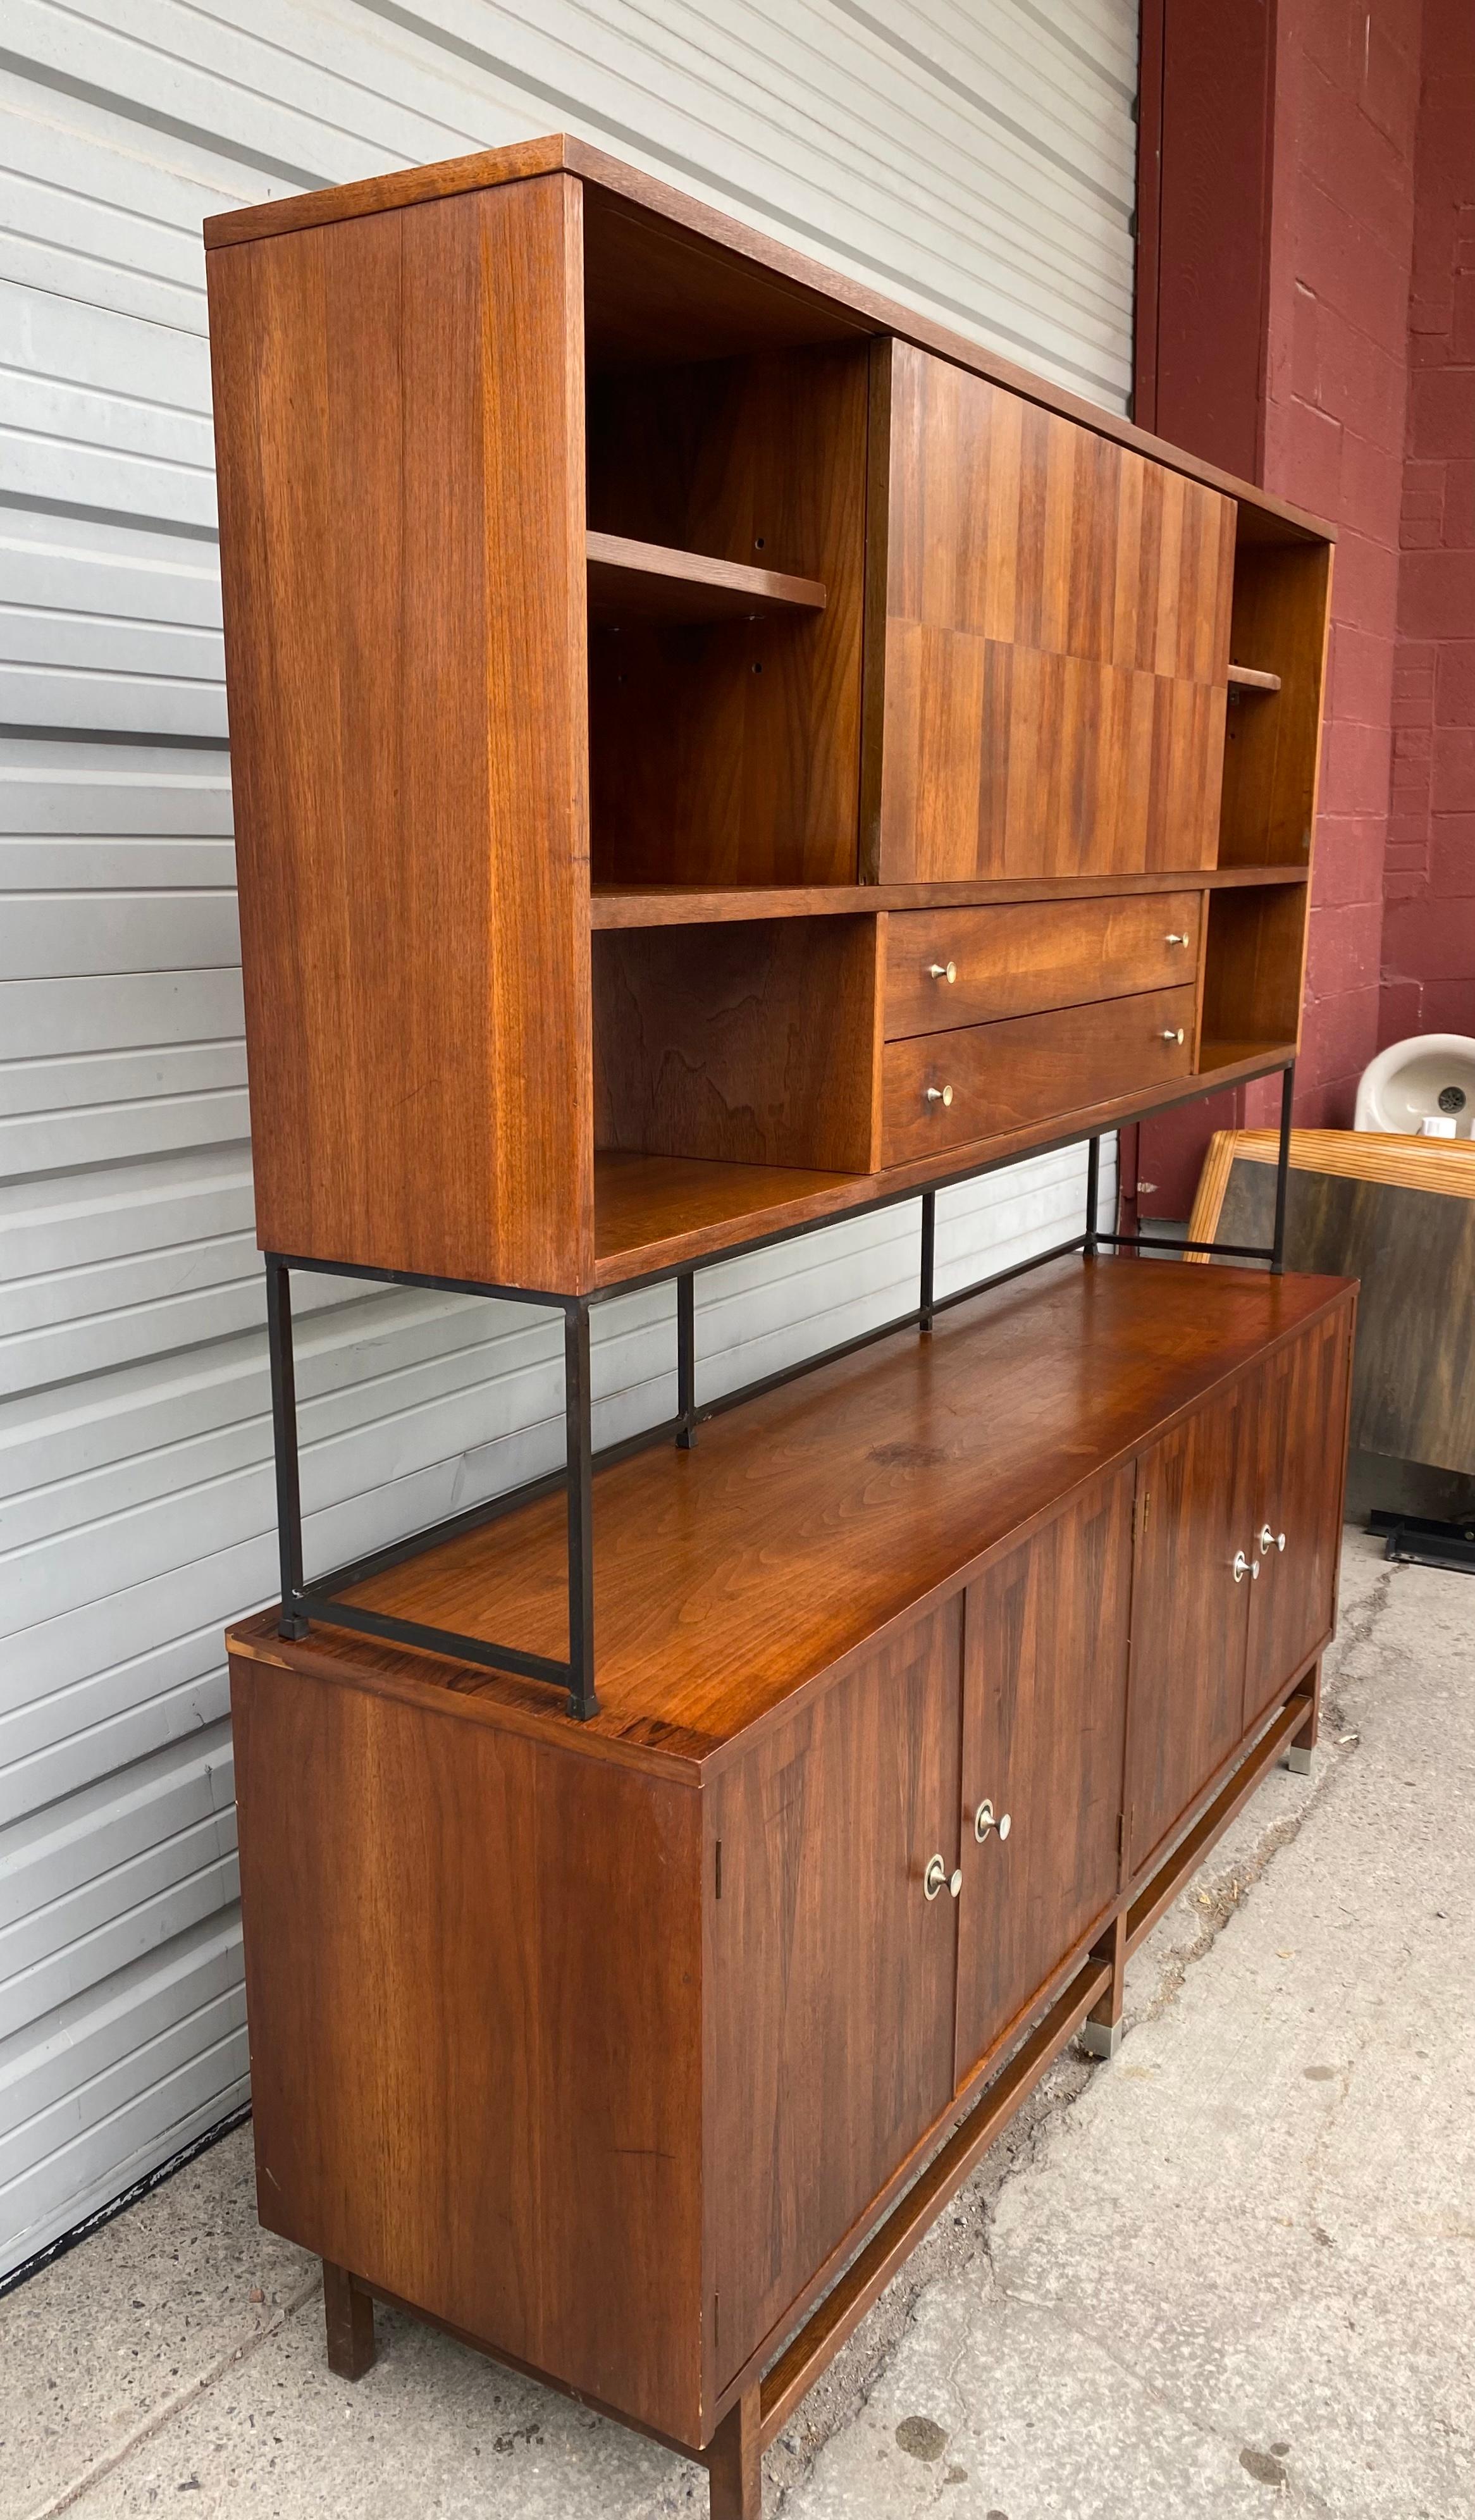 Classic Modernist wall unit long credenza /top by Stanley in Walnut and Rosewood,,,Amazing design.Generous storage...Iron frame top ,,two sliding doors and drawers,,Bottom credenza,,(left) ,shelves ,,(right) ,,three drawers including silverware